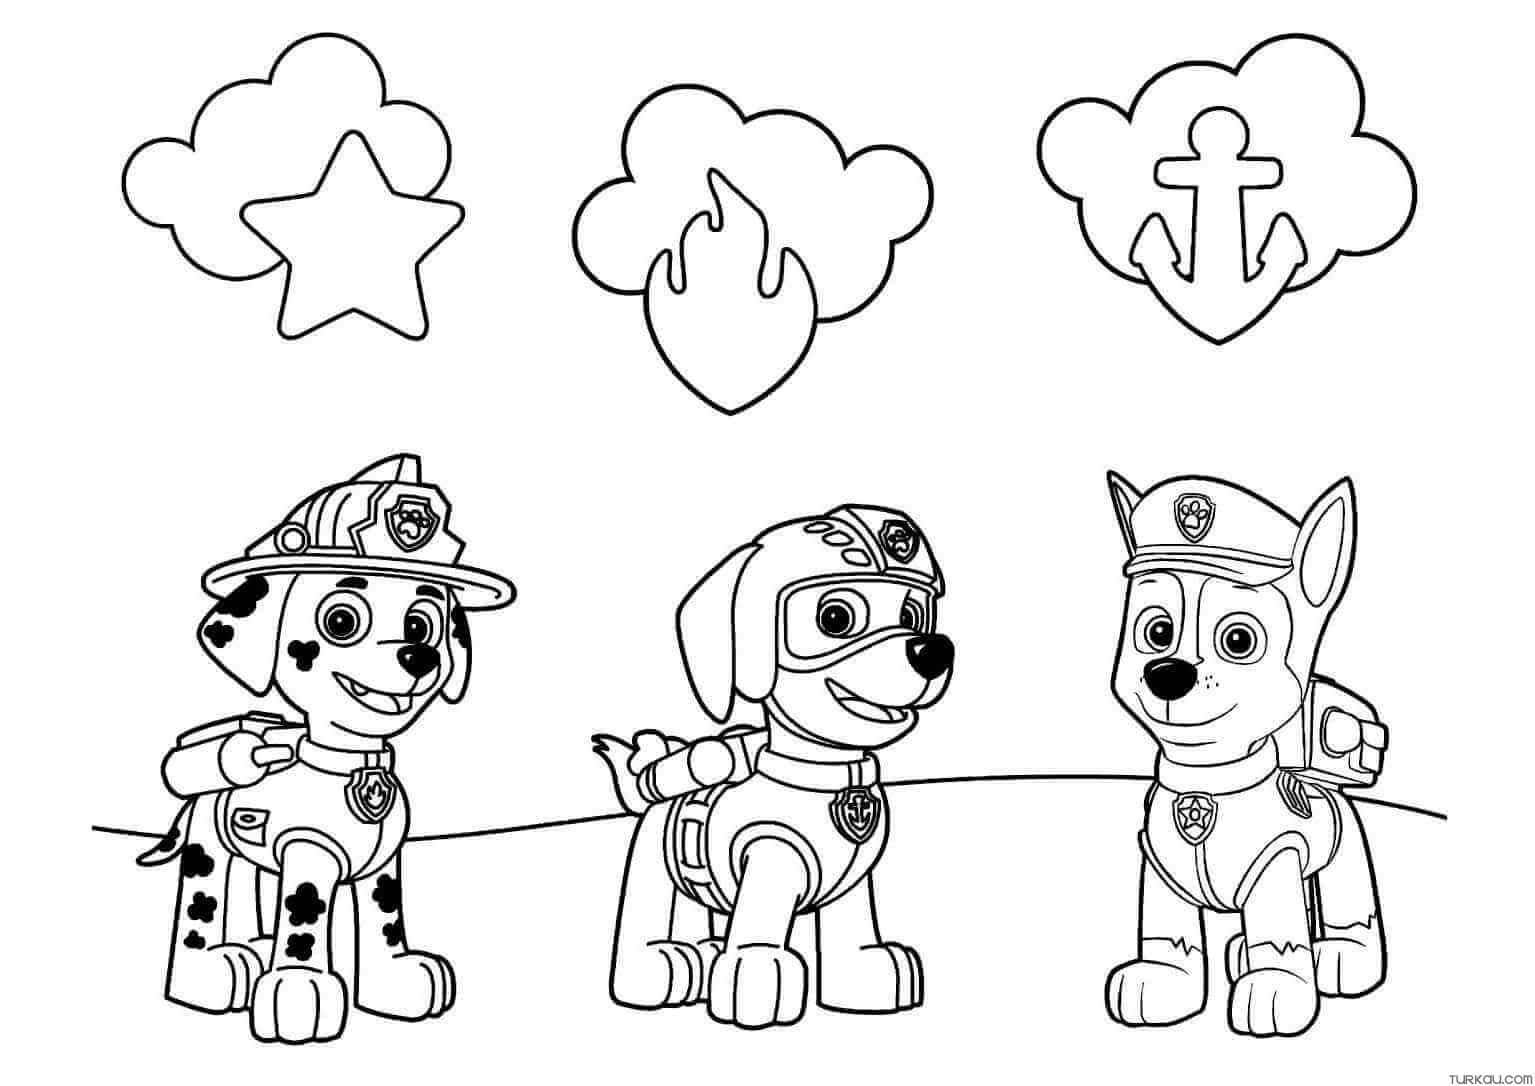 New Wooden Paw Patrol Drawing 30 Pieces Jigsaw Puzzles Best Toys Gifts for  Kids | eBay